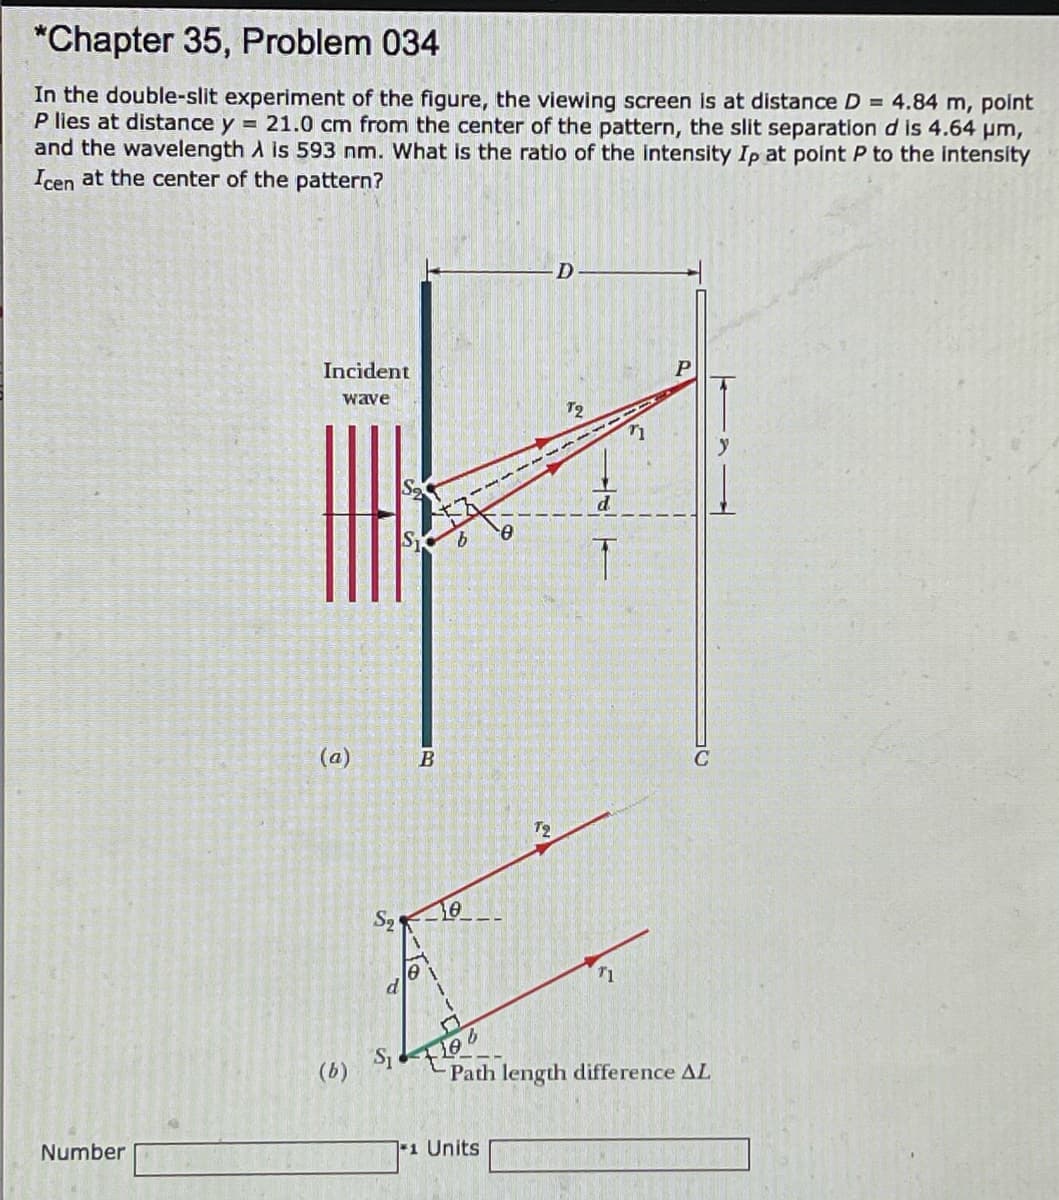 *Chapter 35, Problem 034
In the double-slit experiment of the figure, the viewing screen is at distance D = 4.84 m, point
P lies at distance y = 21.0 cm from the center of the pattern, the slit separation d is 4.64 µm,
and the wavelength A is 593 nm. What is the ratio of the intensity Ip at point P to the intensity
Icen at the center of the pattern?
Incident
wave
T2
(a)
S2
(b)
Path length difference AL
Number
-1 Units
